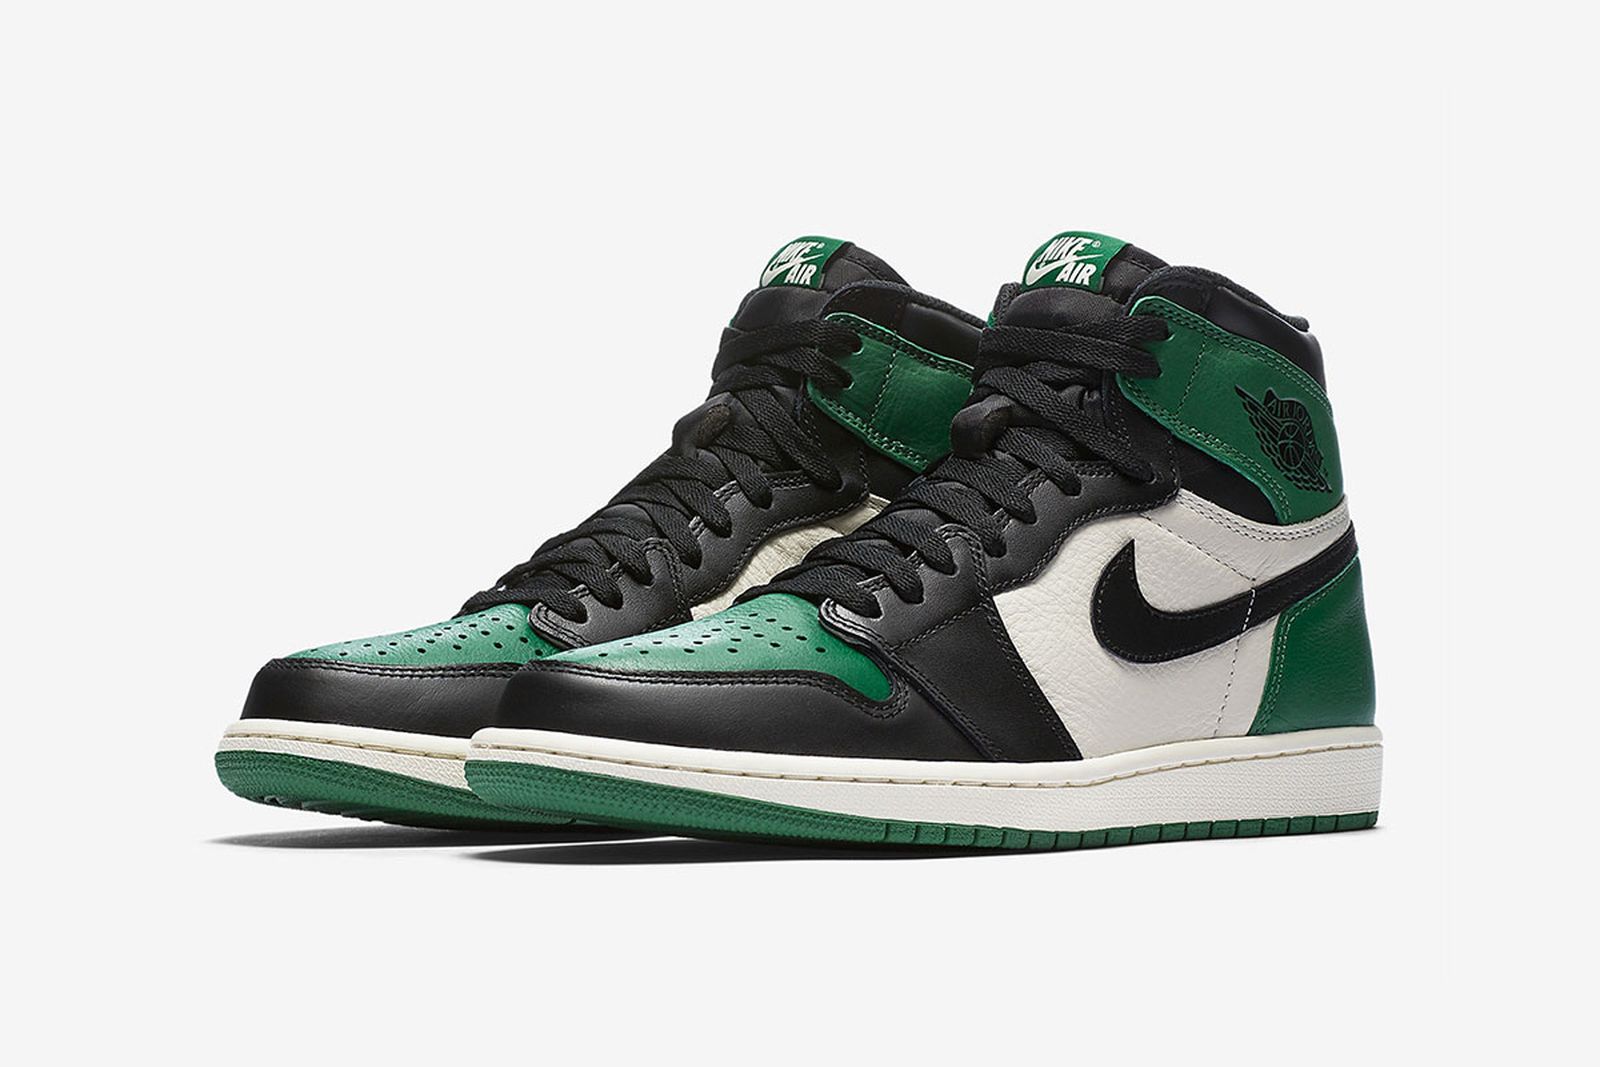 hard working recovery whistle Nike Air Jordan 1 “Pine Green”: Release Date, Price & Info